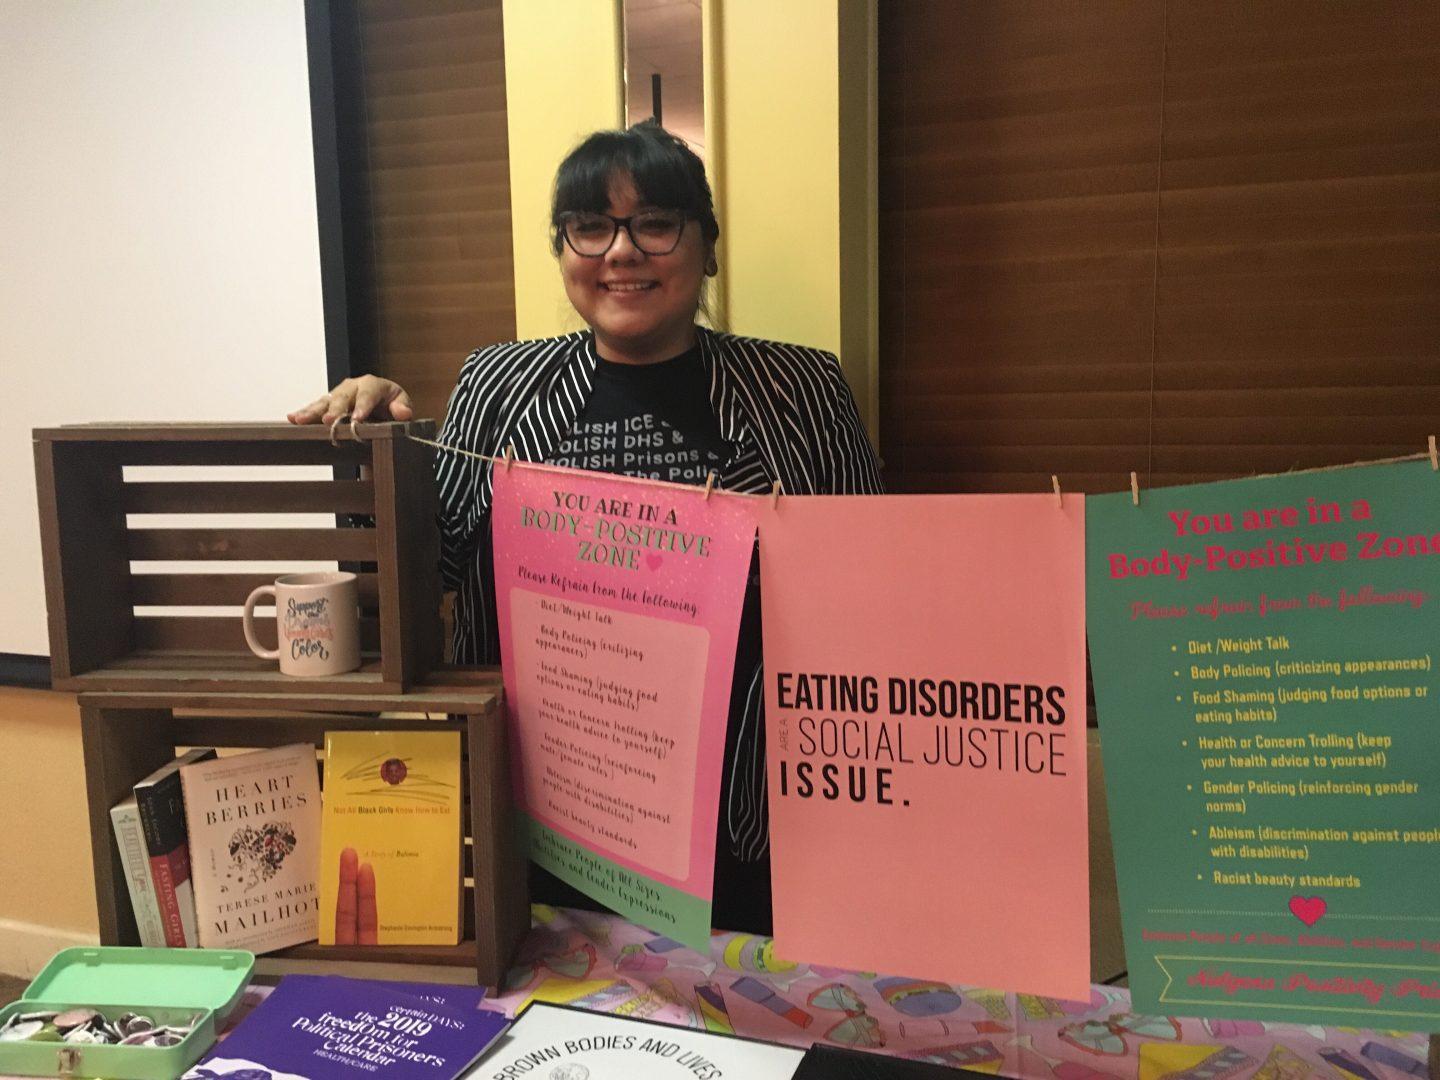 Gloria Lucas stands with literature and signs promoting body pride and positive self-image. (Melina Ortiz/The Collegian)